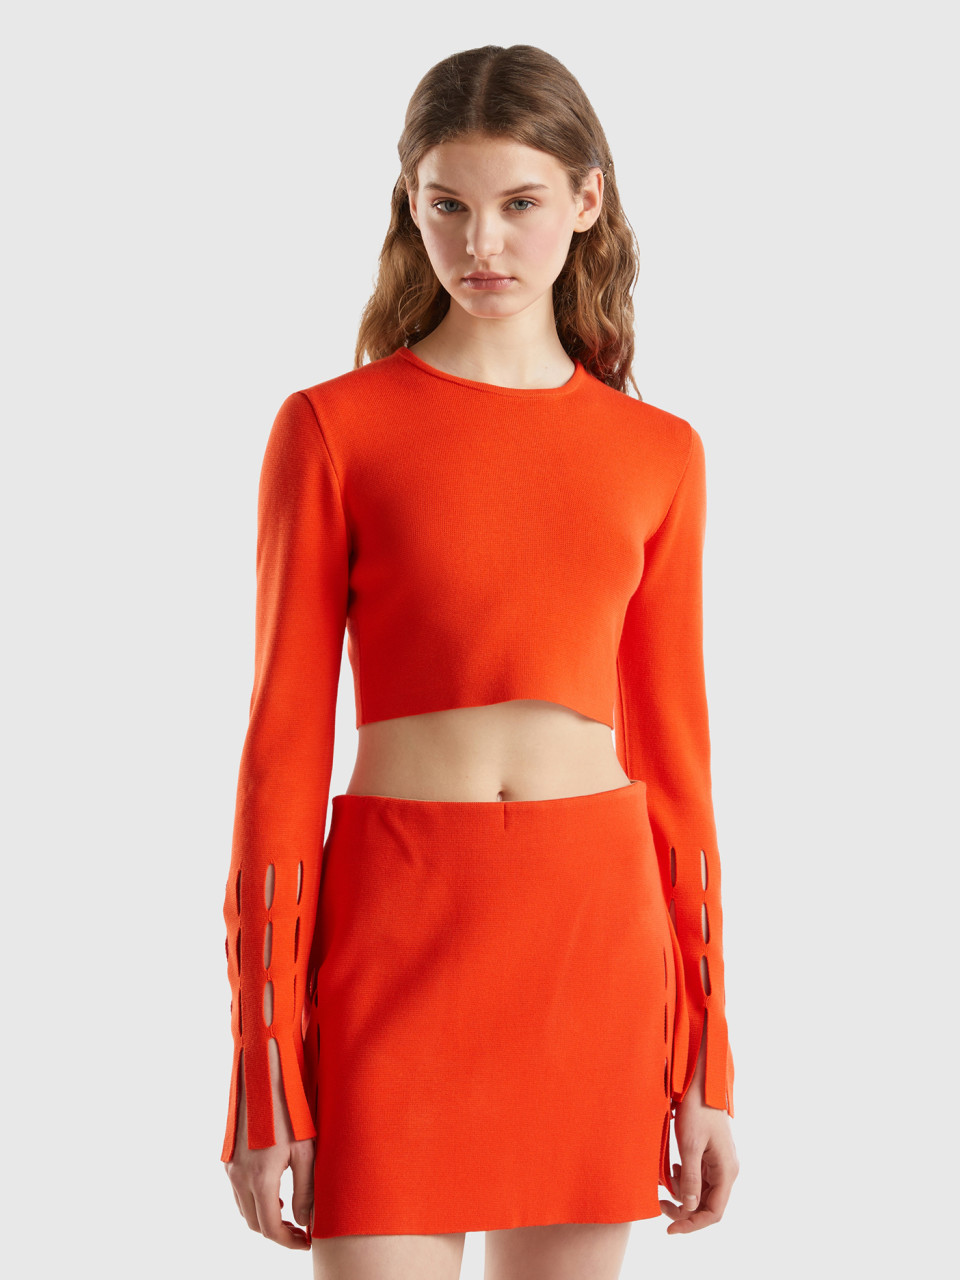 Benetton, Cut-out Cropped Sweater, Red, Women